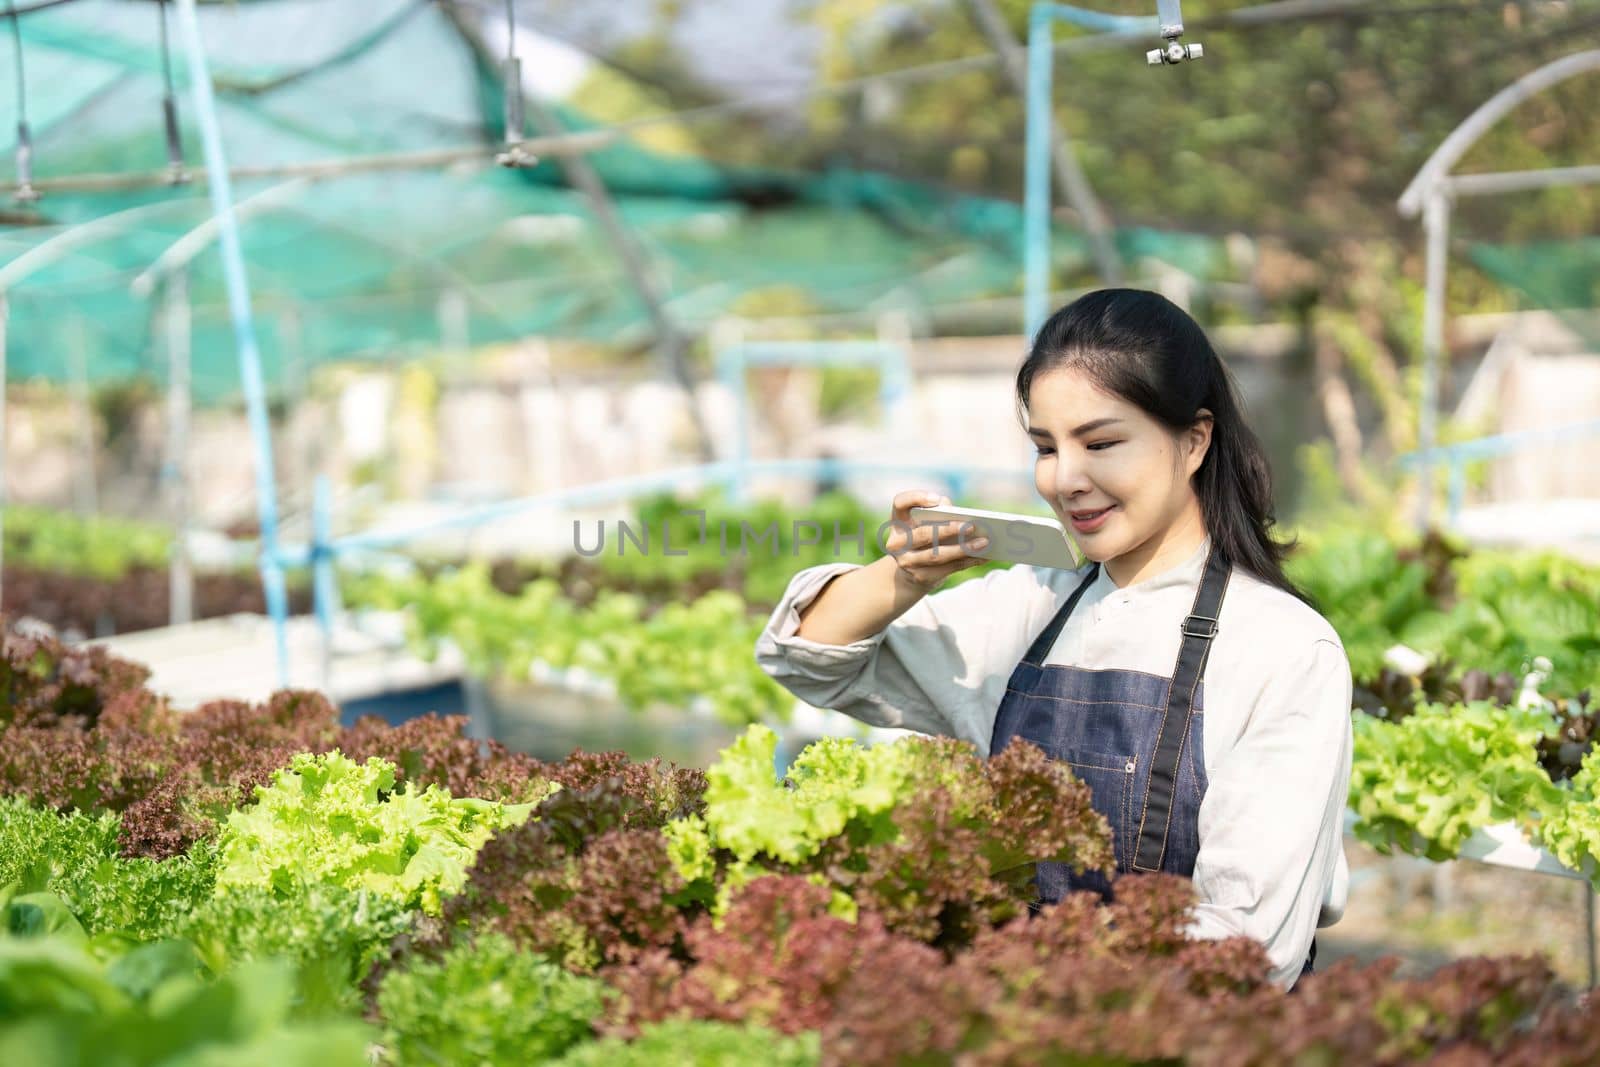 Asian women grow hydroponics vegetables in greenhouses. Inspecting the quality of agricultural produce. Modern farming concepts using modern technology.